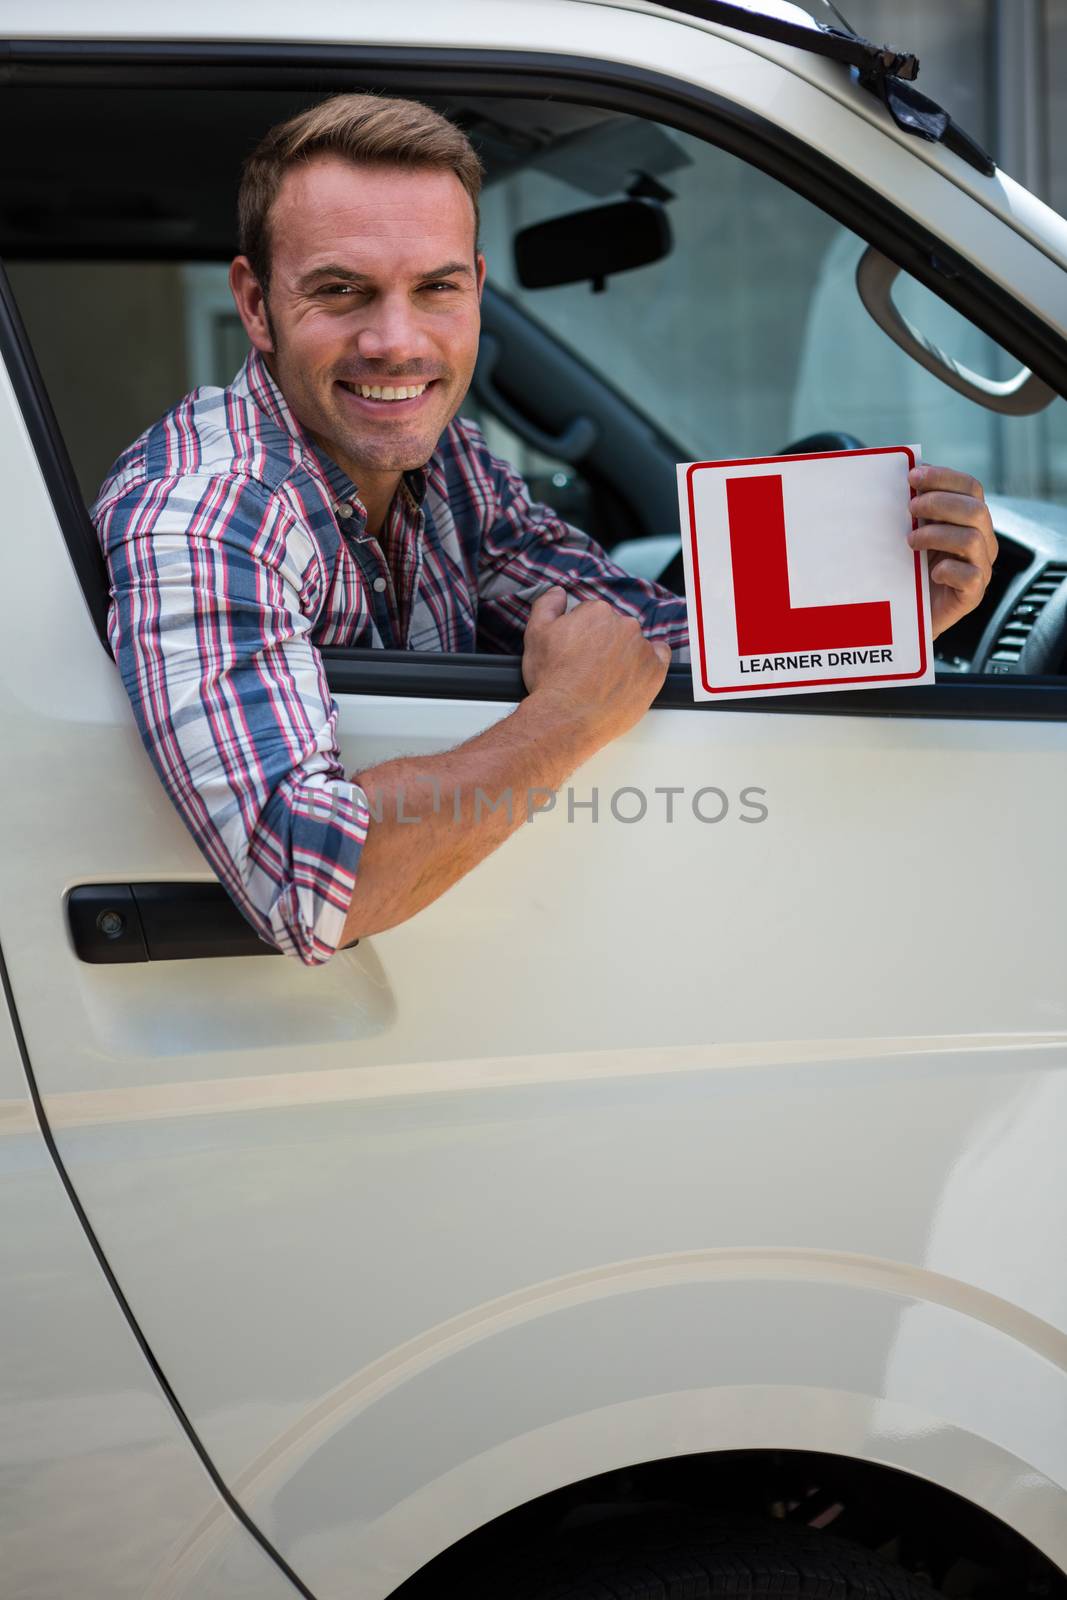 Portrait of young man holding a learner driver sign